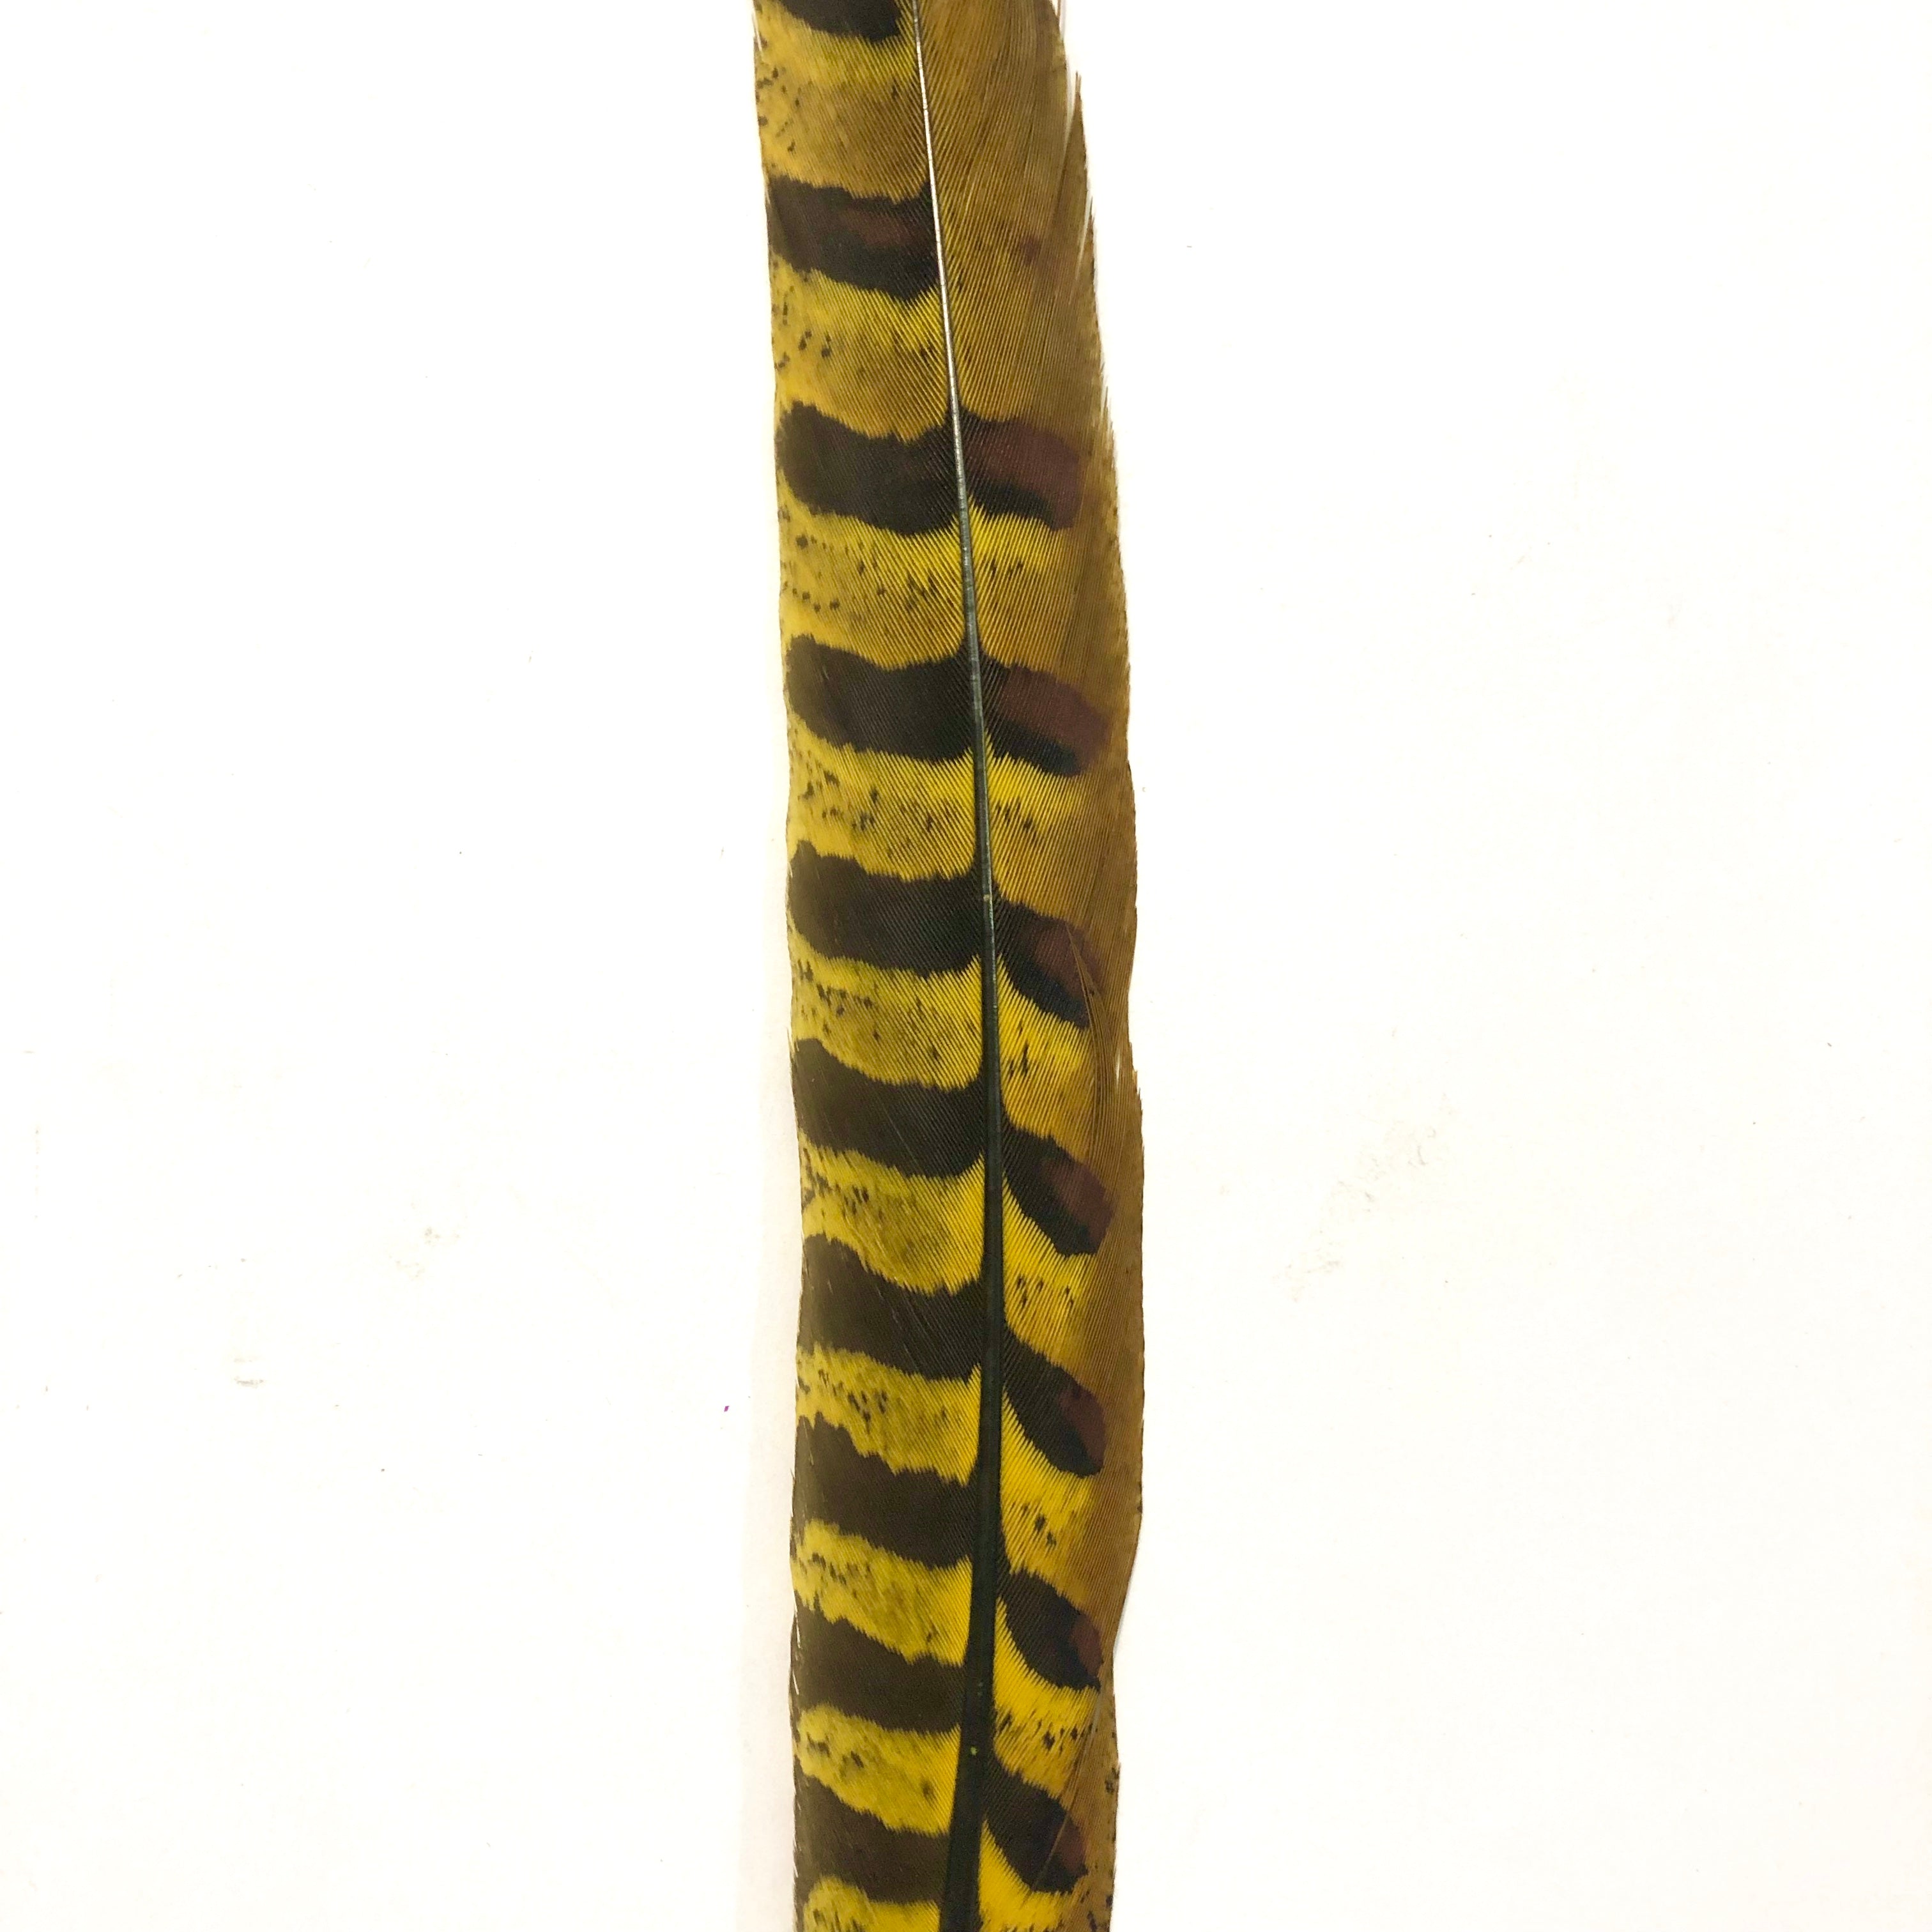 12" to 14" Reeves Pheasant Tail Feather - Yellow